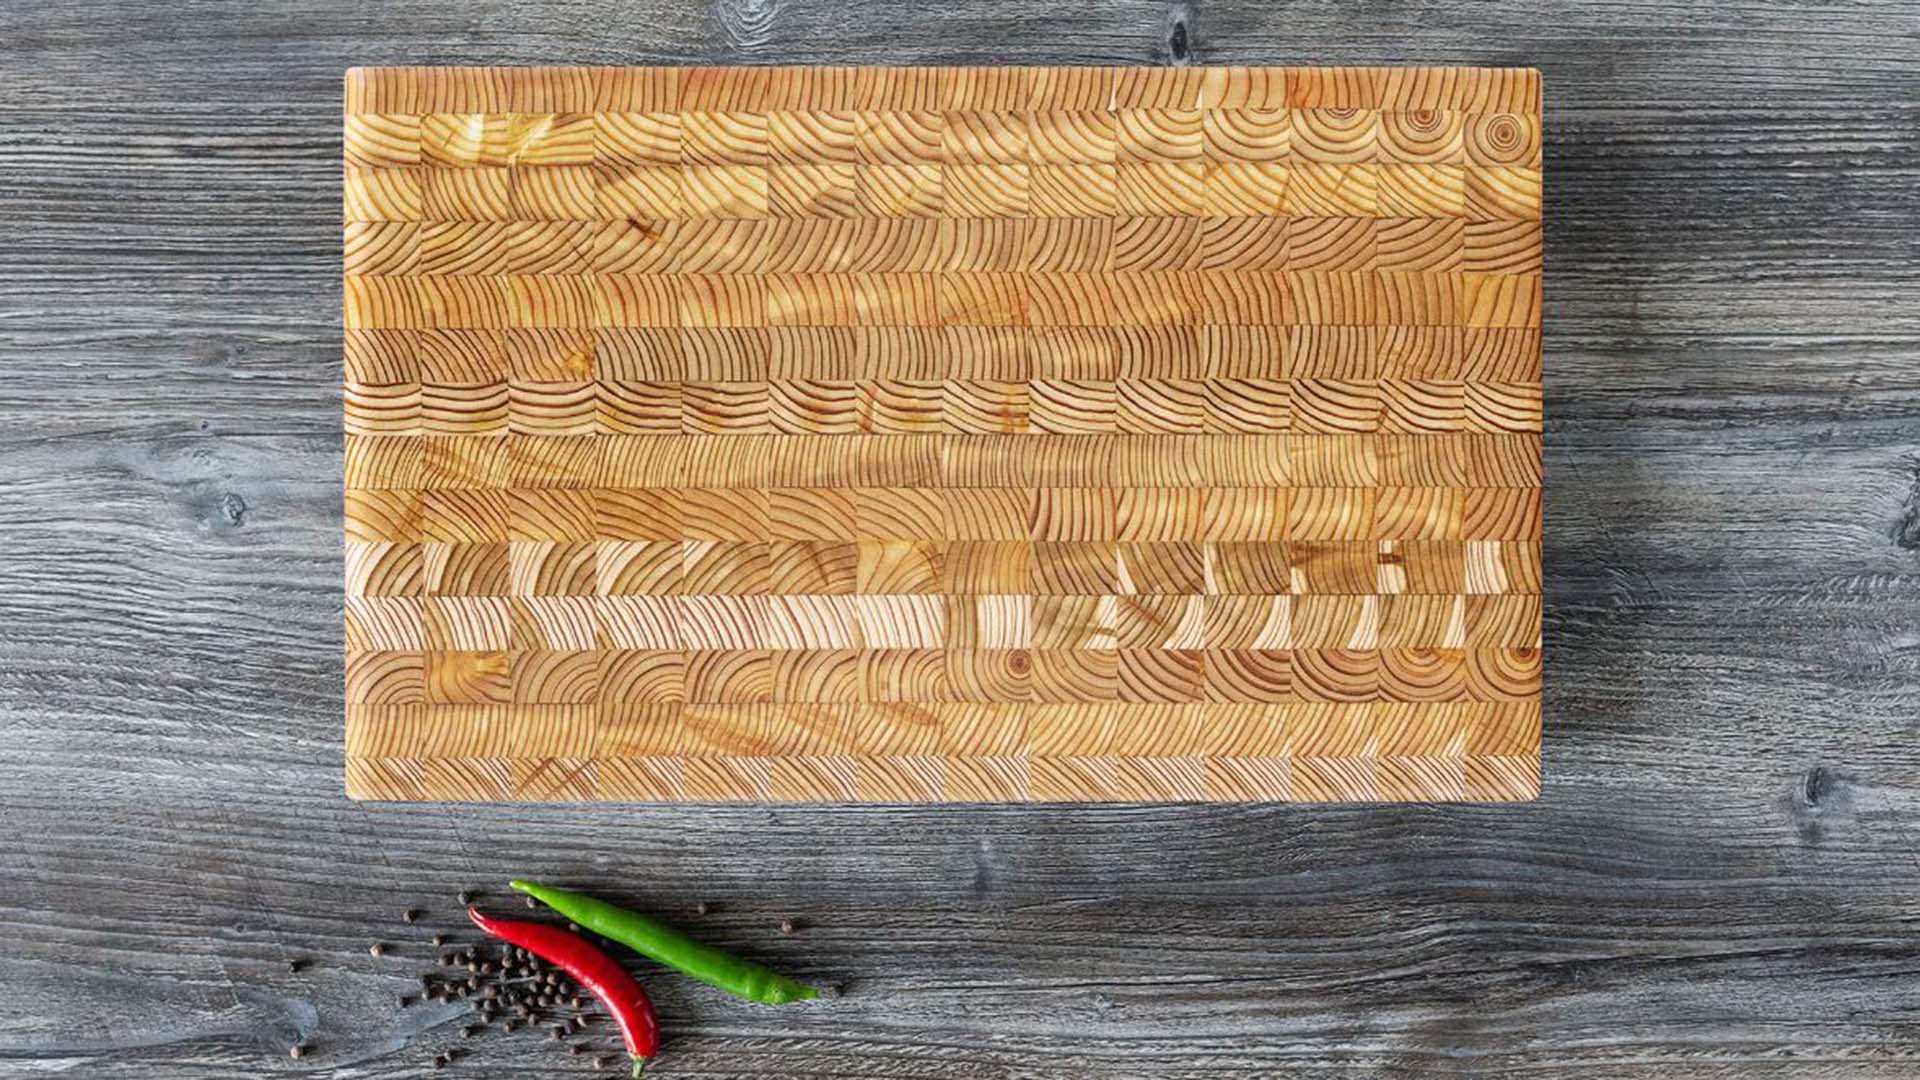 Larch Wood Canada – Handmade End-Grain Cutting Boards and More